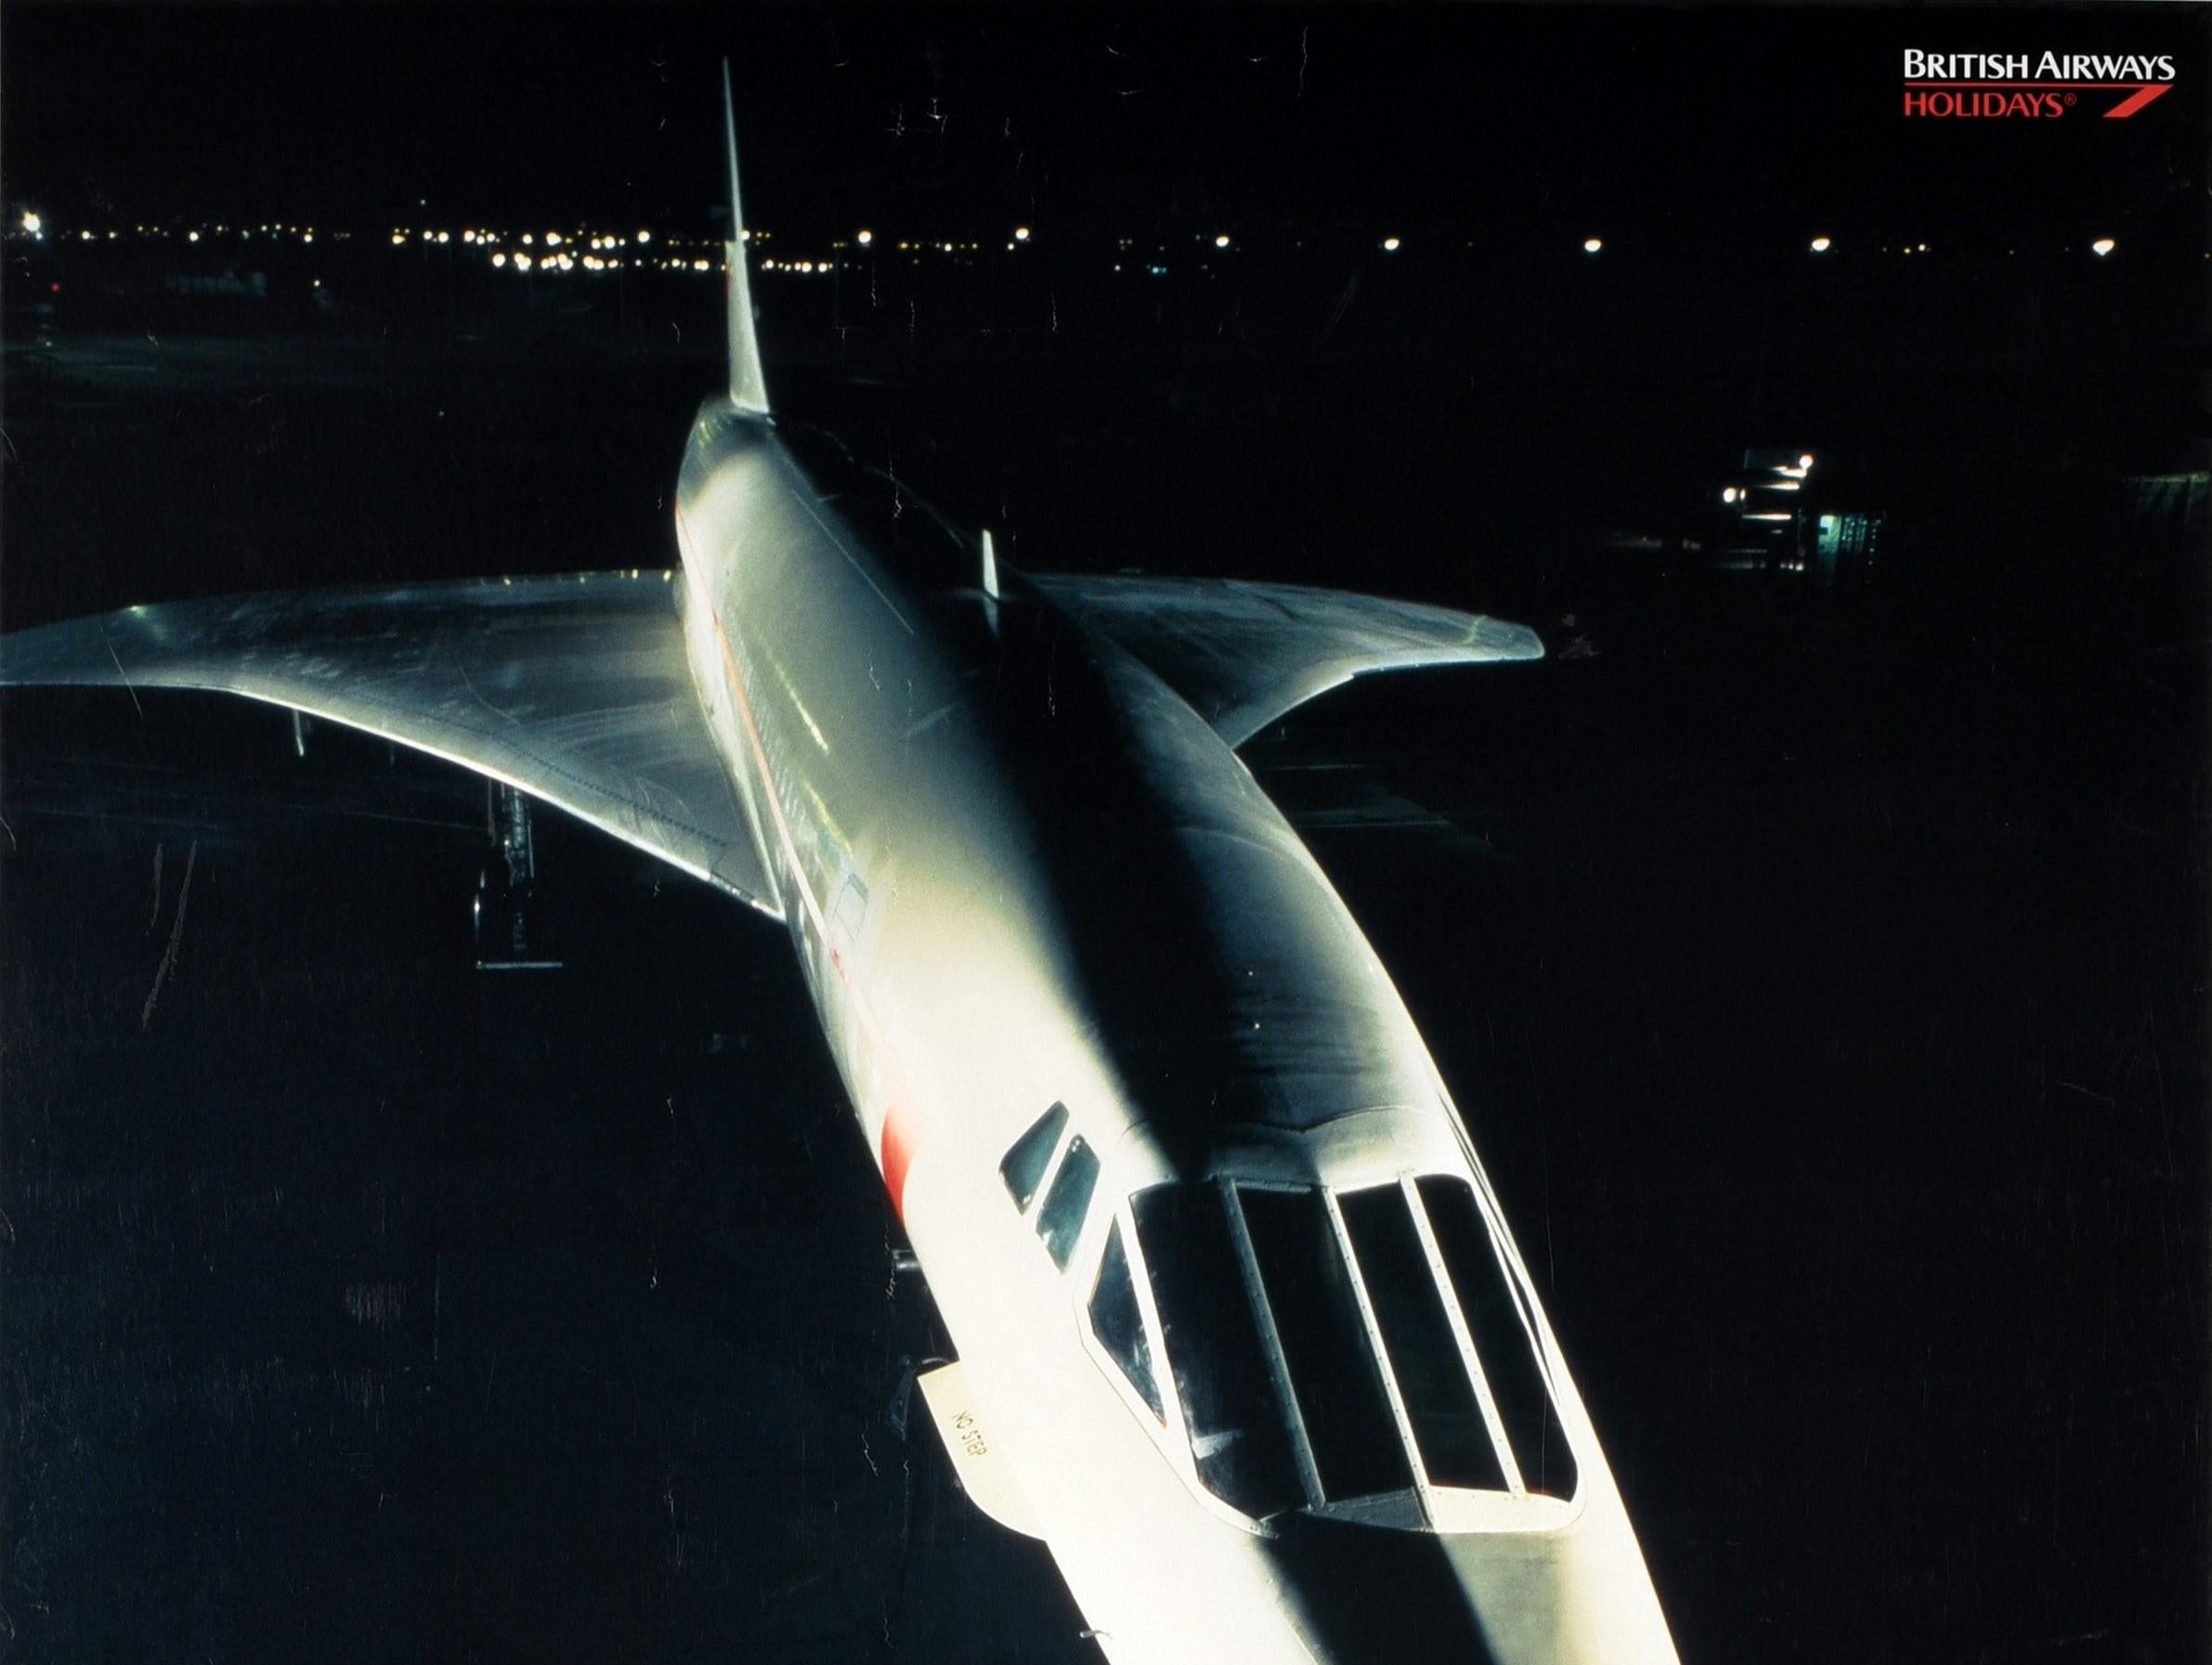 Original vintage travel advertising poster for Concorde Vacations British Airways Holidays featuring a great image of an iconic Concorde plane flying at night towards the viewer with lights visible on the black background, the text below and above